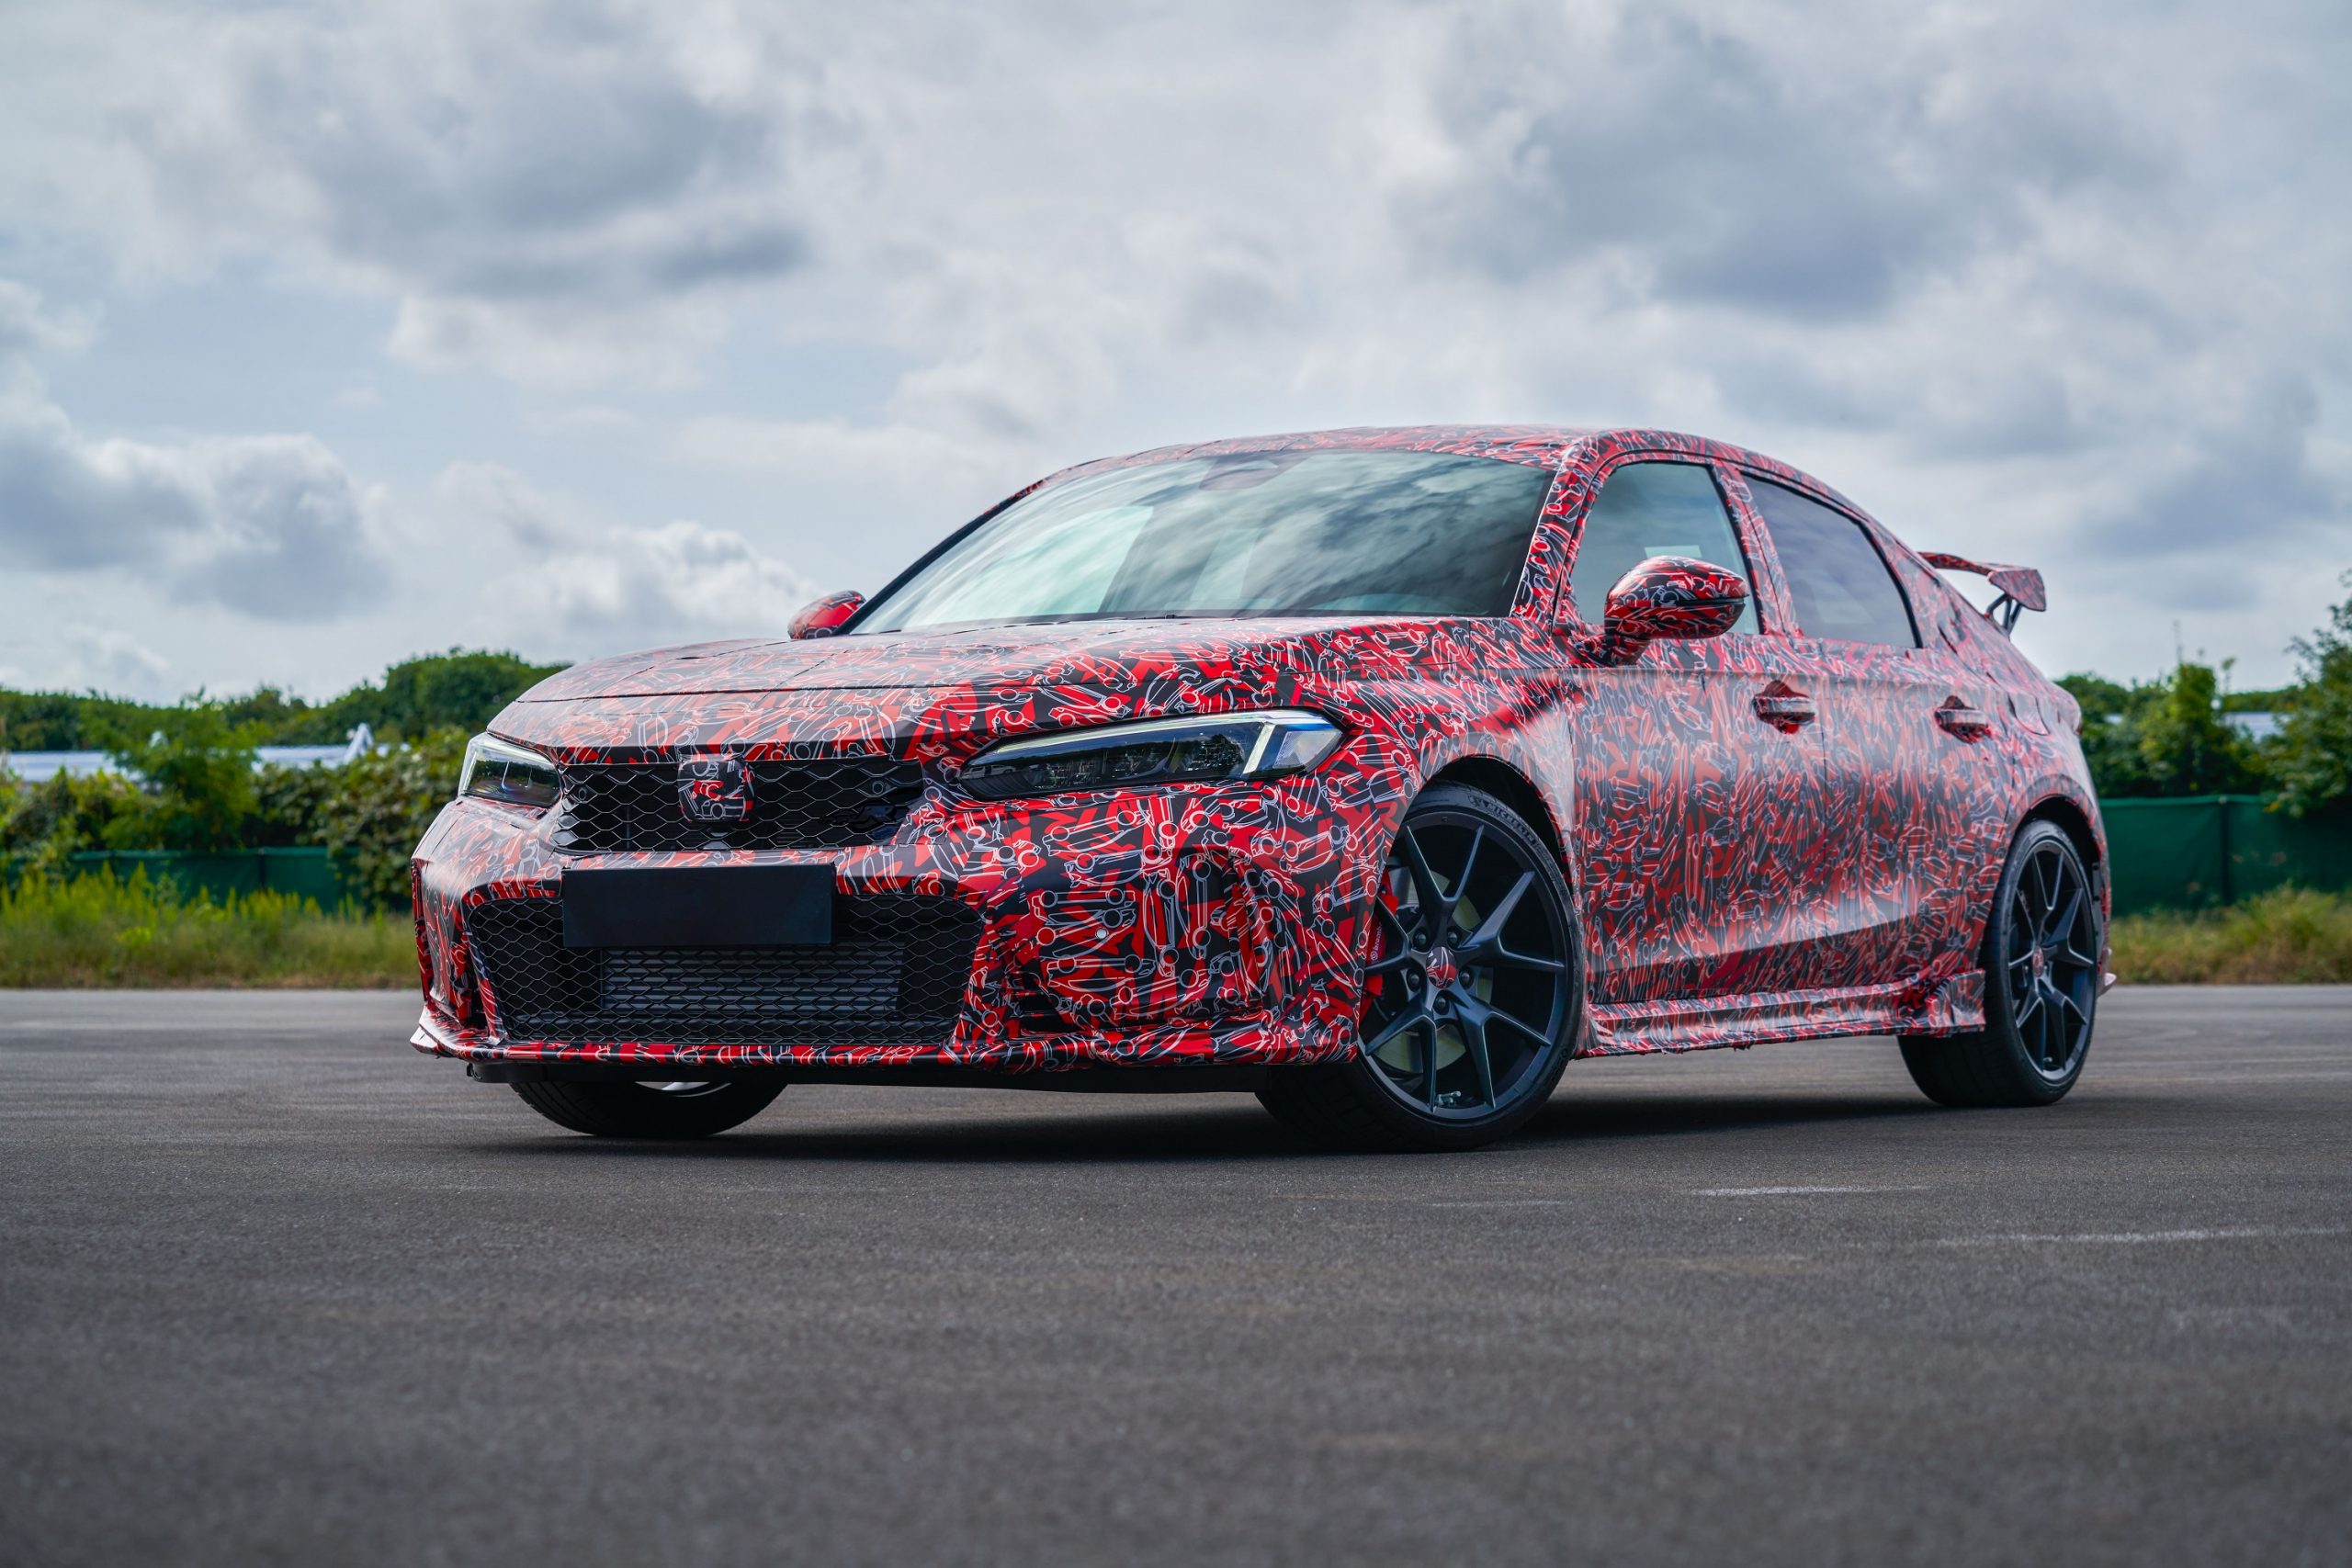 The 2022 Honda Civic Type R with red camo livery shot from the front 3/4